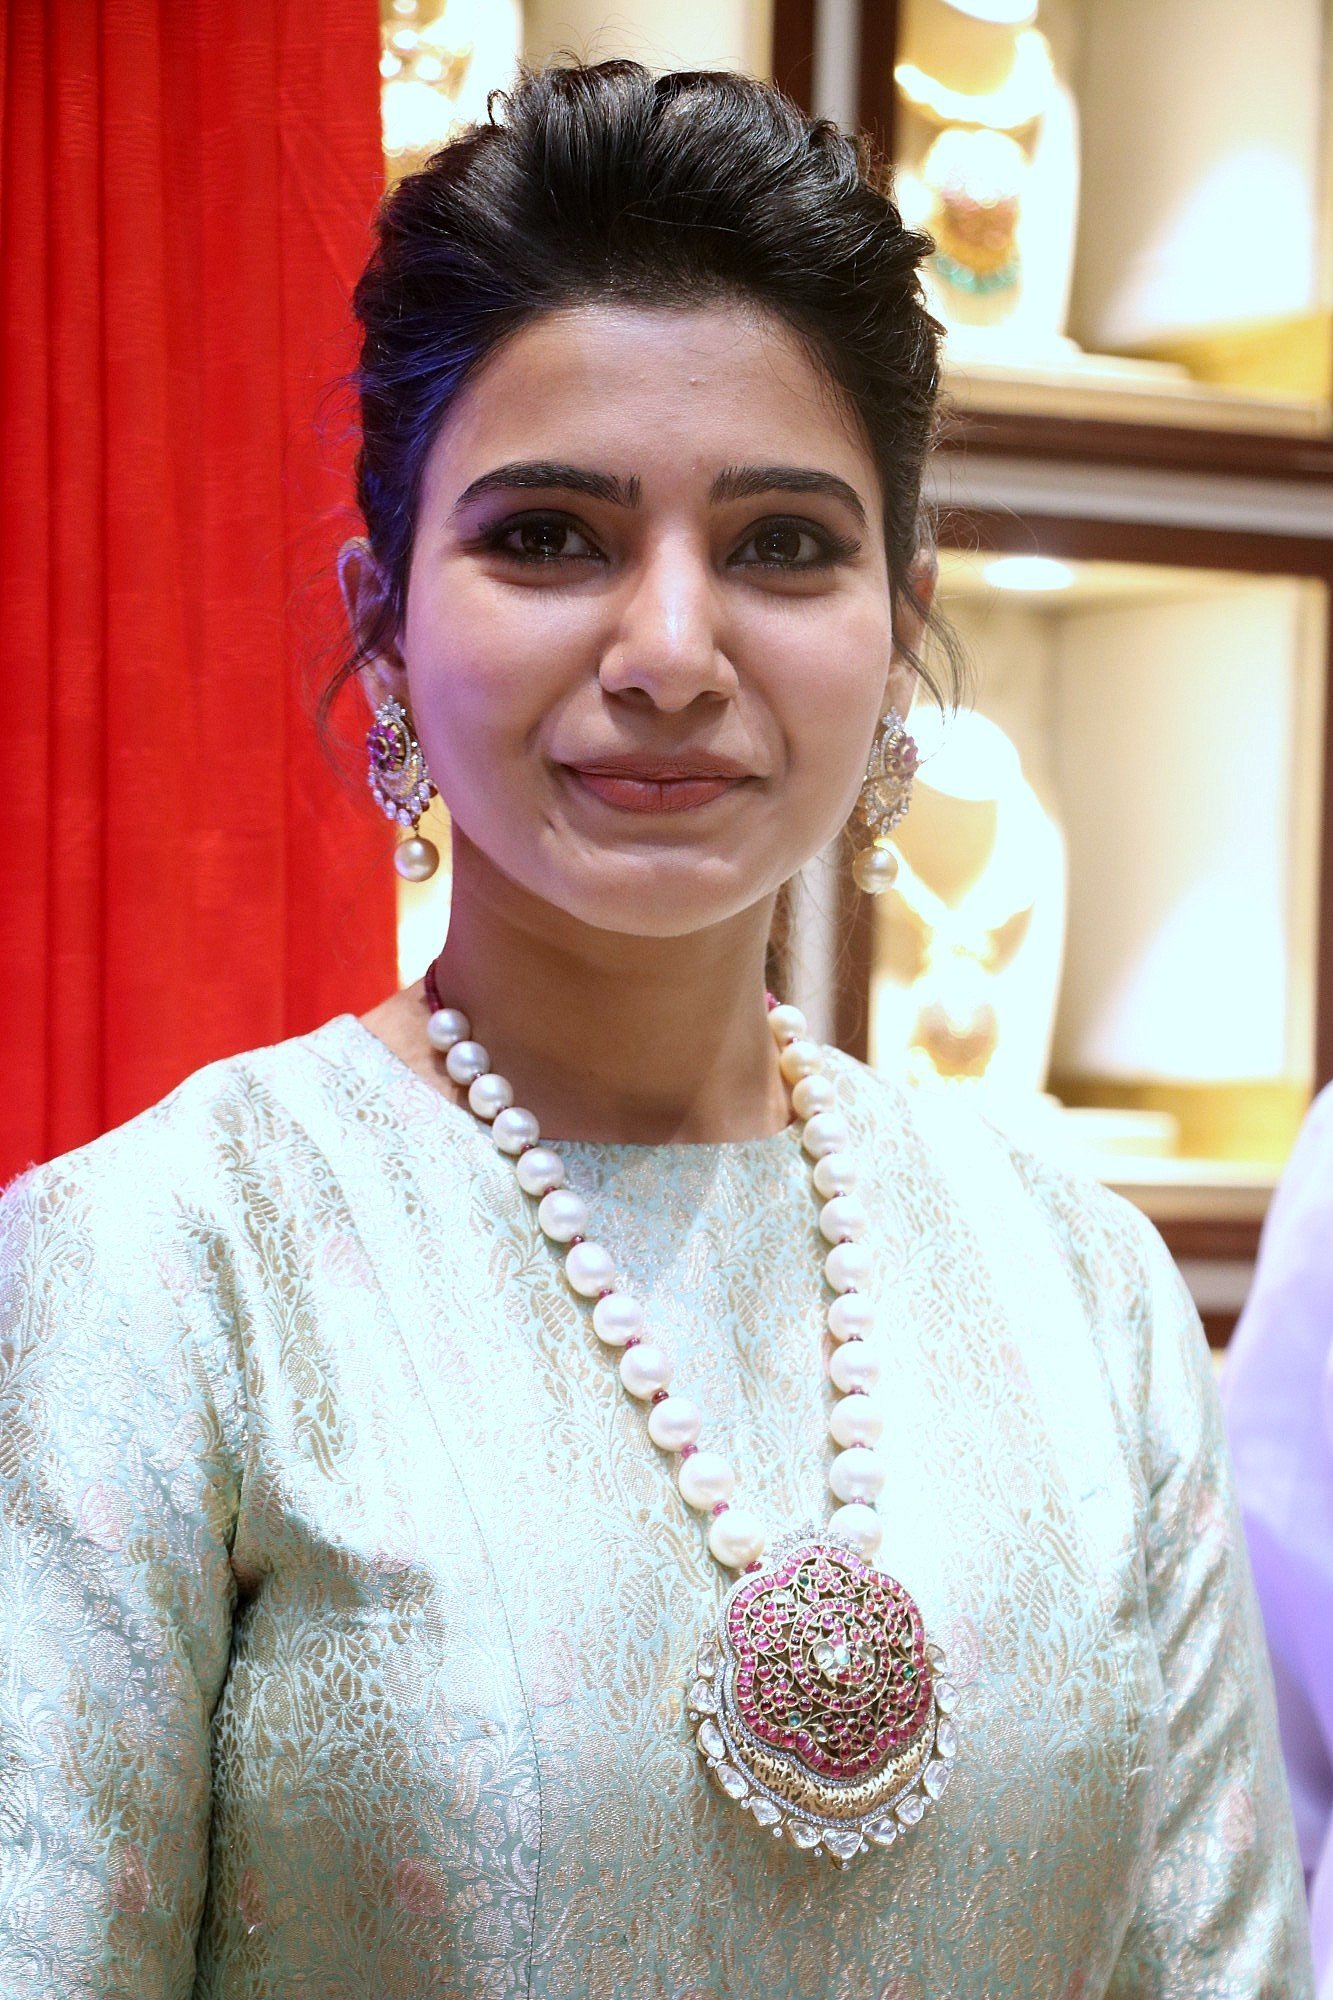 Actress Samantha Launch of NAC Jewellers Antique Exhibition Photos | Picture 1520791